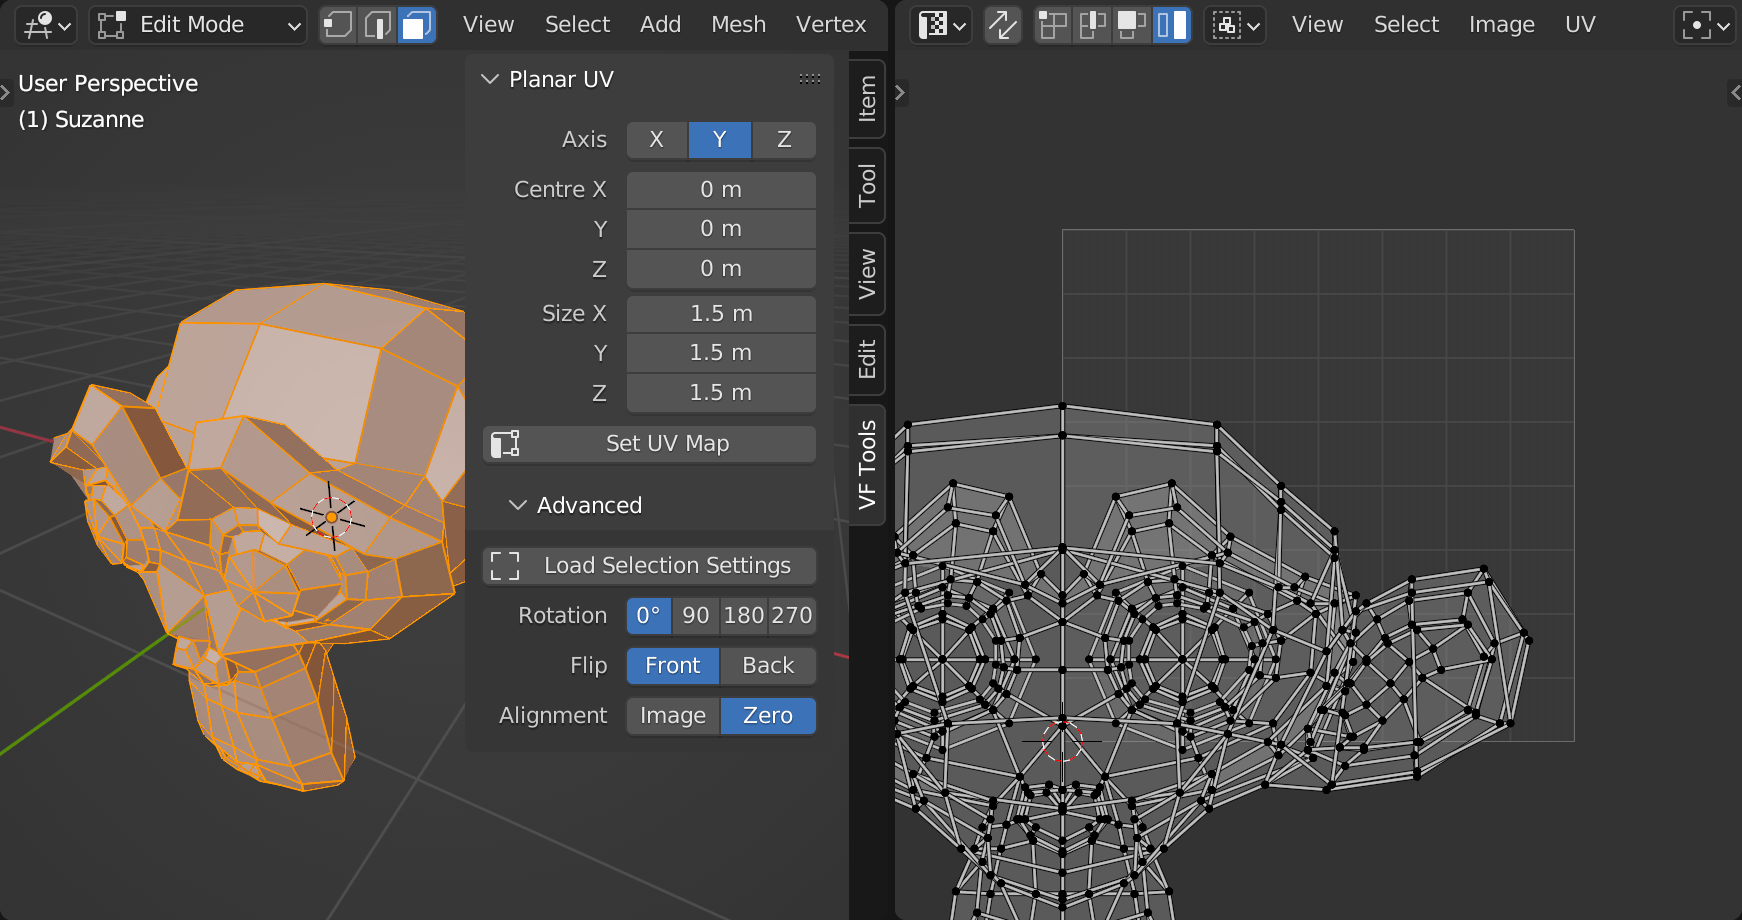 screenshot of Blender 3D and UV editor interfaces showing the plugin mapping a standard monkey head with Y axis planar projection mapping aligned to UV 0,0 instead of centred within the UV frame